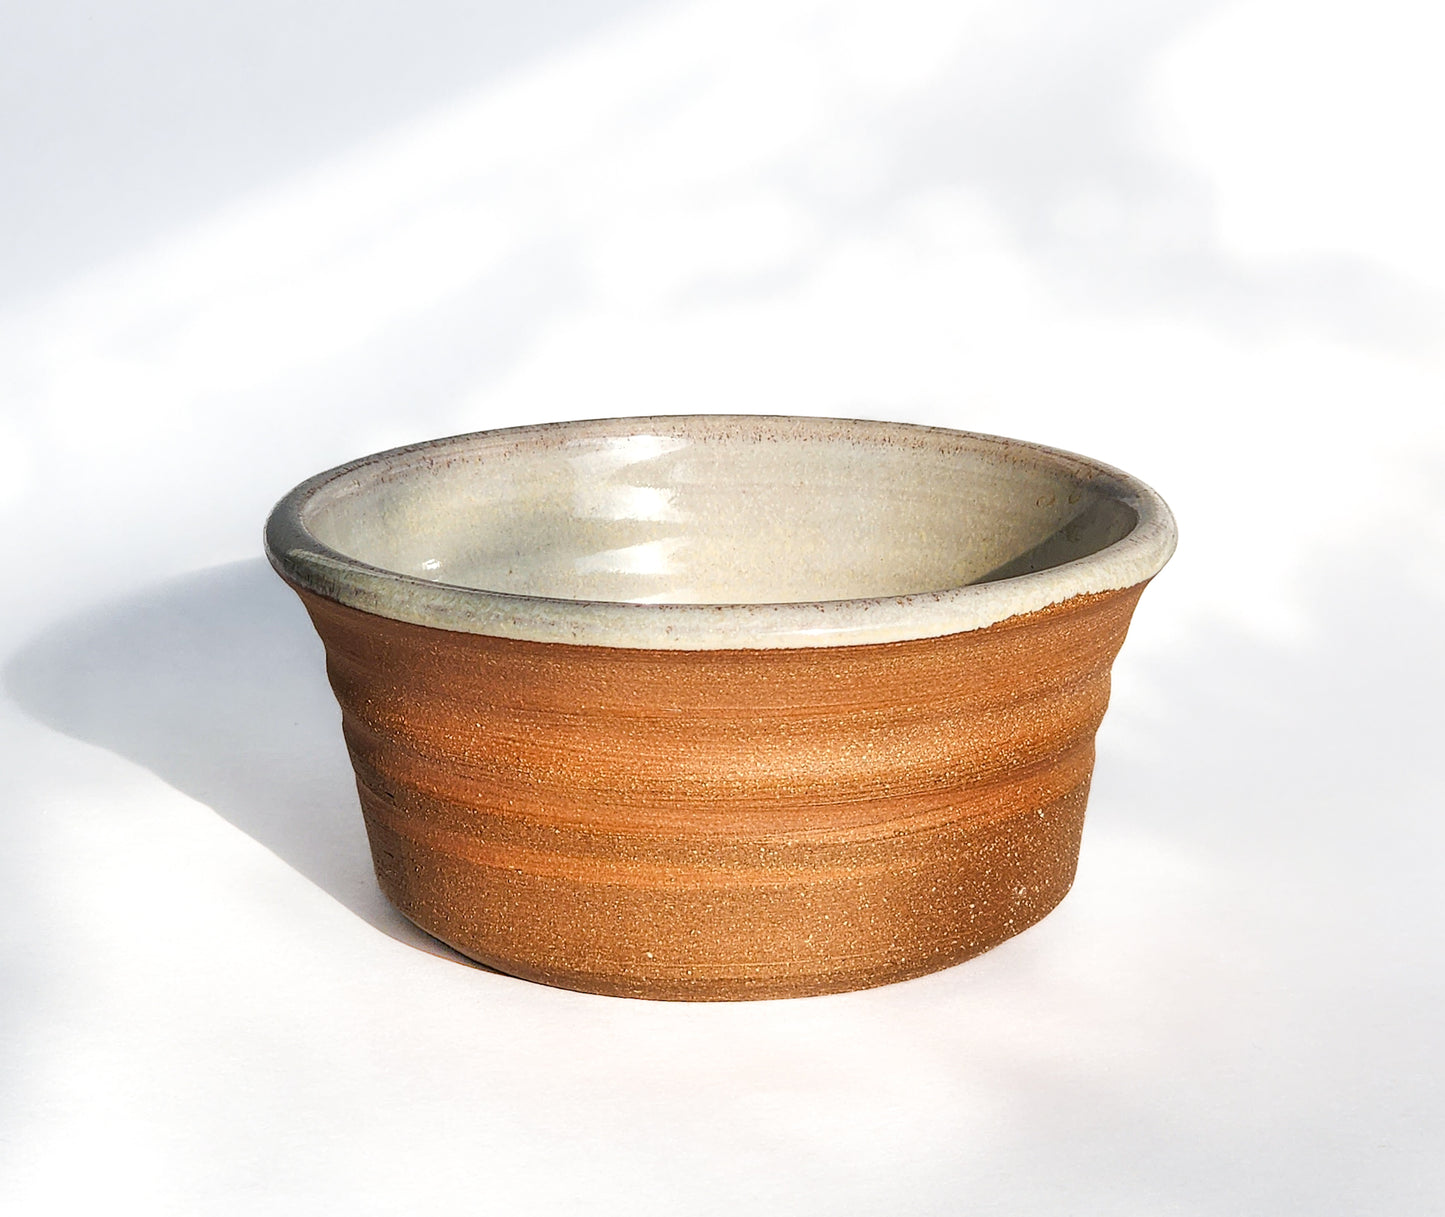 Image: Clinton Pottery's Handmade 1 Cup Flat Bottom Bowl in Natural (Unglazed) – Embracing simplicity and authenticity, this machine washable bowl combines artistry with a natural aesthetic. The unglazed exterior offers a raw and organic feel, reminiscent of earthen pottery and rustic charm. Ideal for serving snacks or adding a touch of elemental elegance to your culinary space.